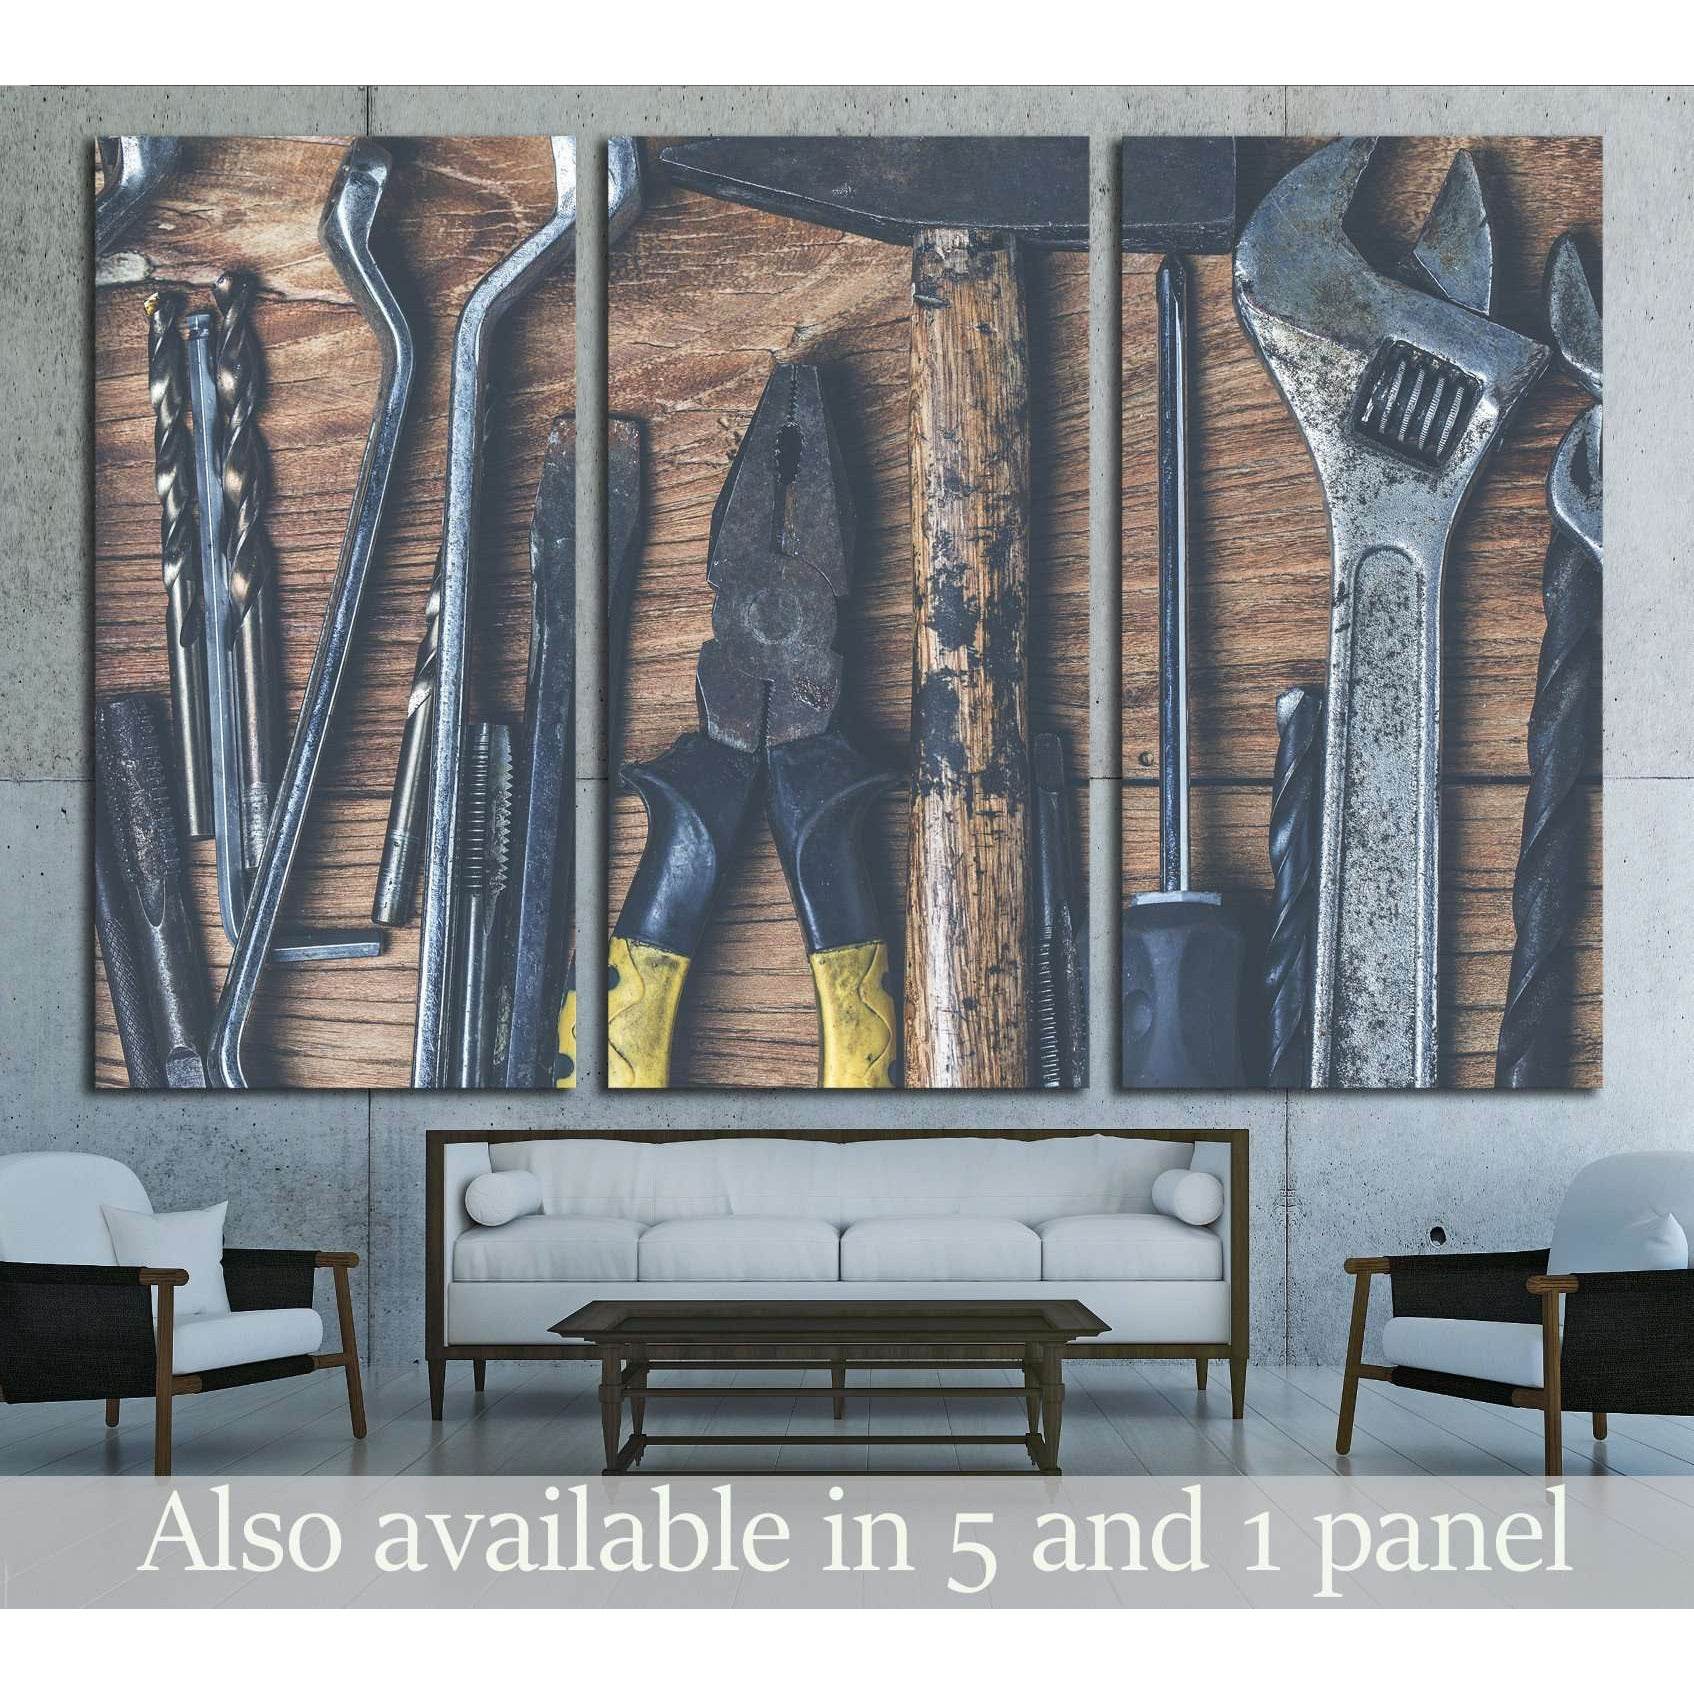 Hand tools on a wooden table in rustic style №1897 Ready to Hang Canvas Print